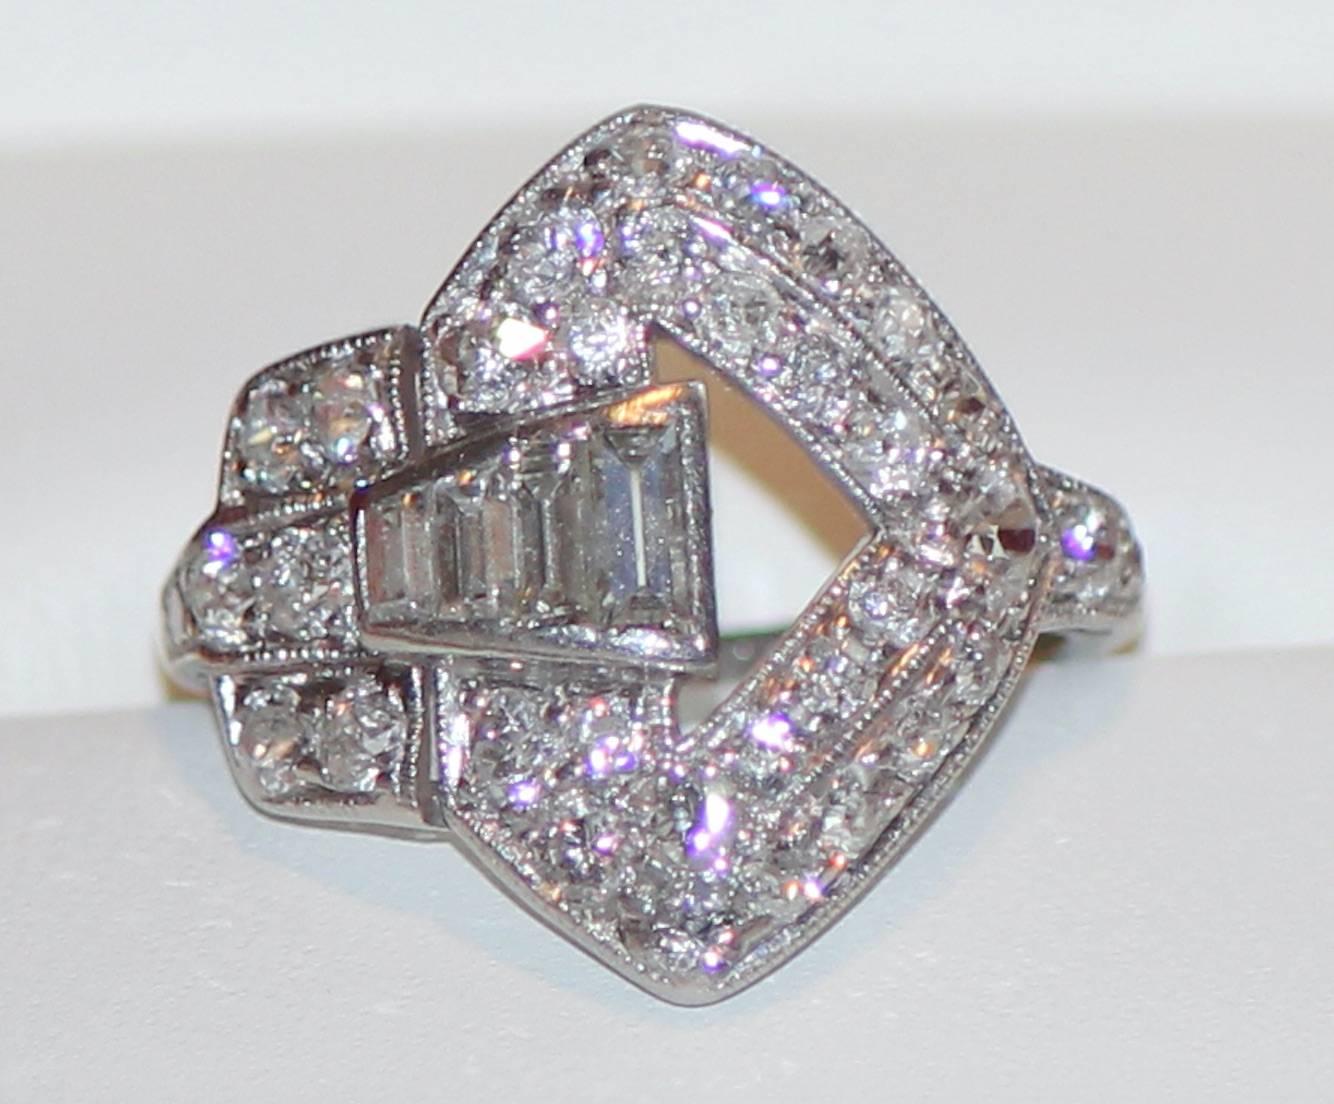 Beautiful original American art deco diamond ring from the F. W. Drosten Jewelery Company of St Louis, Missouri.  The ring consists of four baguette and thirty-four round old mine cut diamonds set in a stunning and unique platinum setting.

Here’s